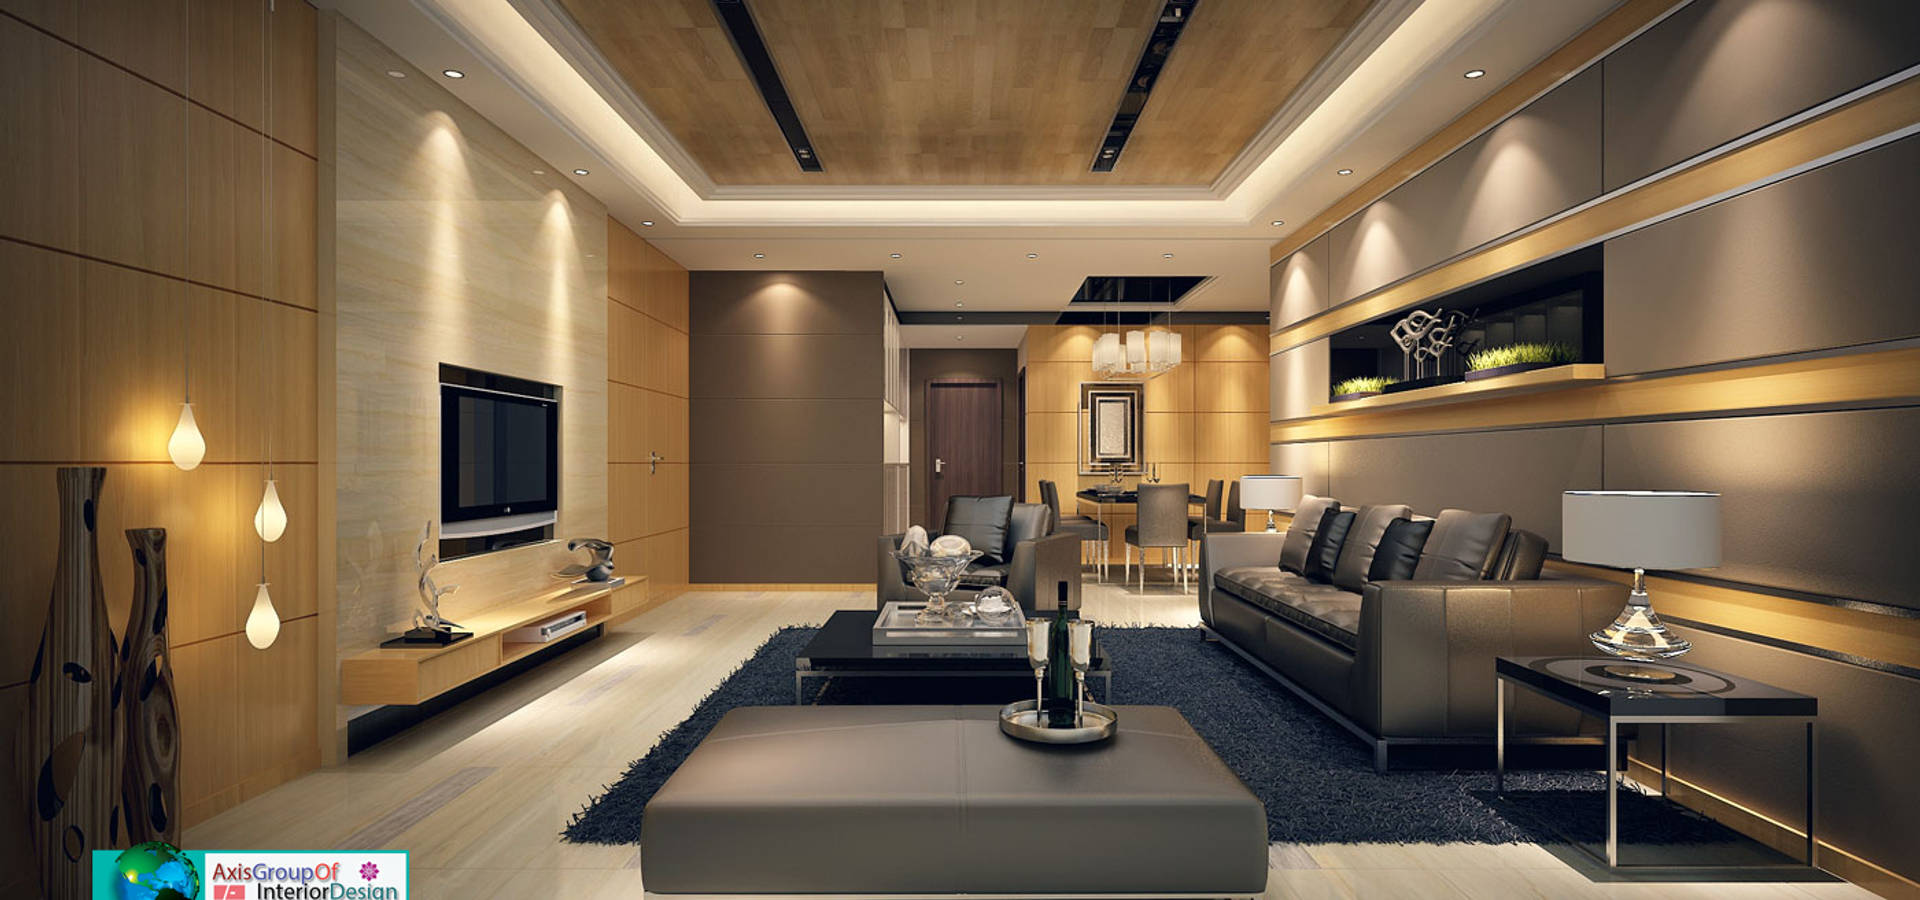 Axis Group Of Interior Design